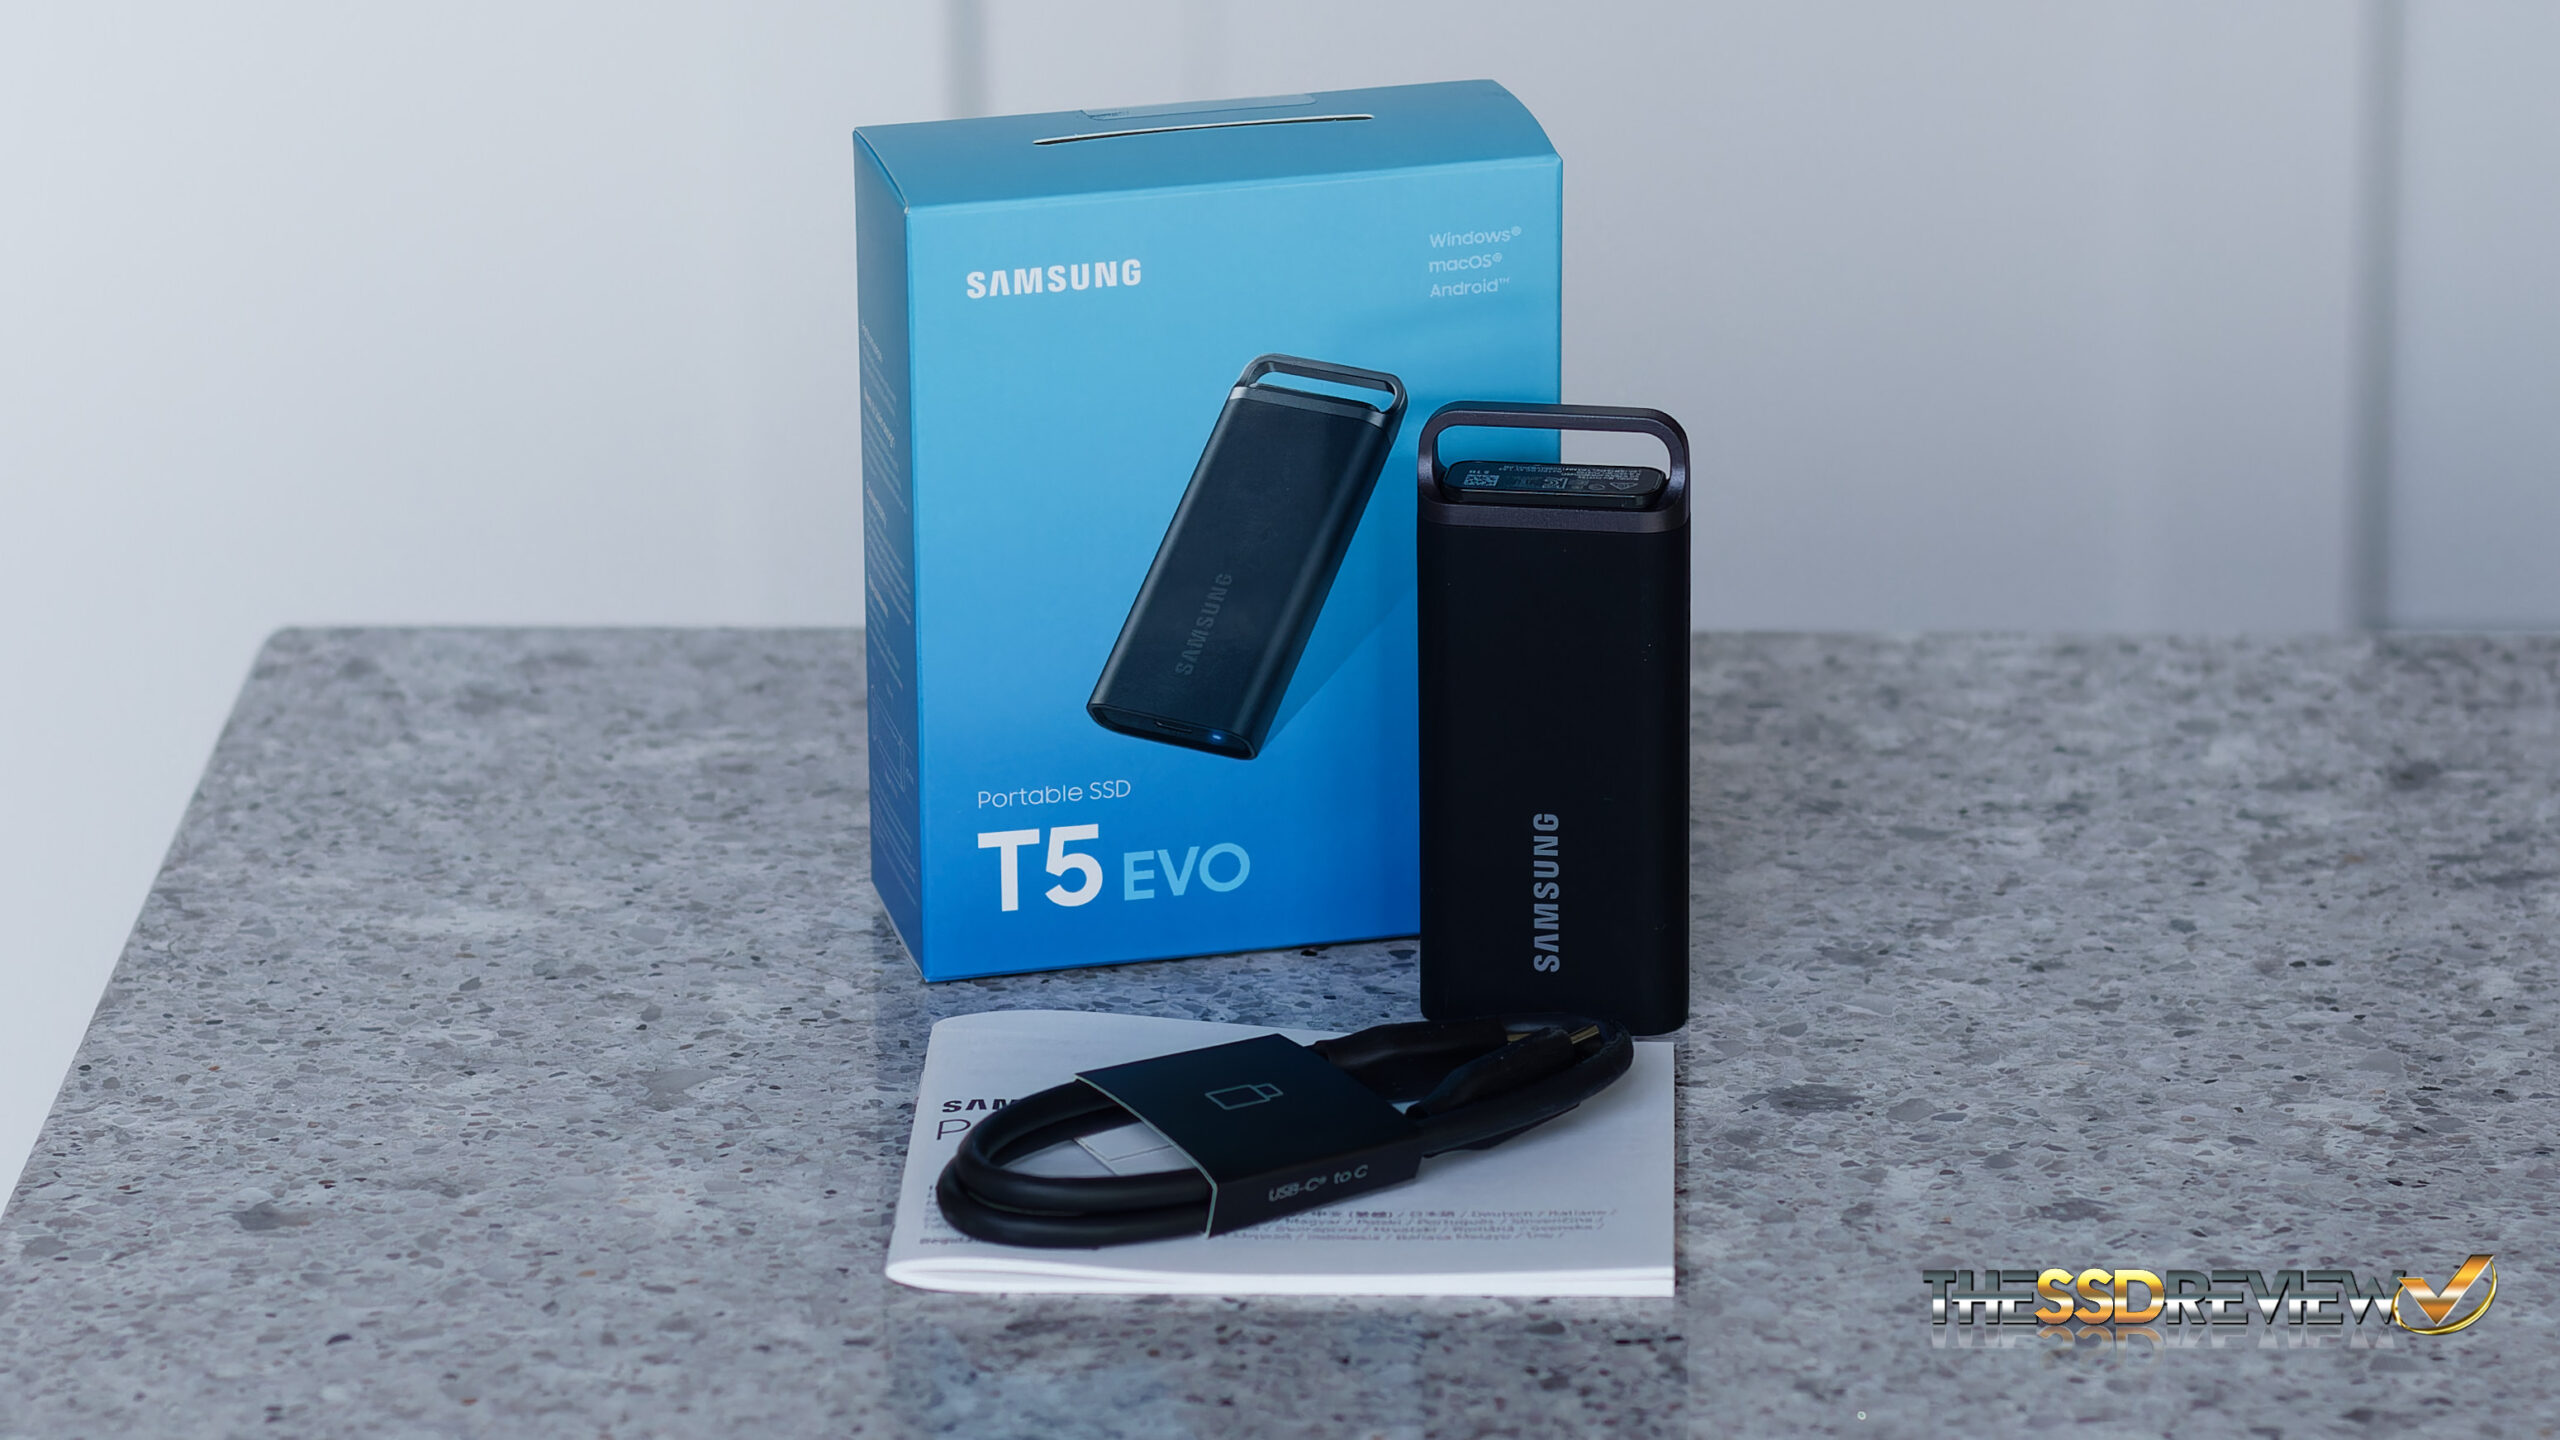 SAMSUNG - SSD Portable T5 2 To